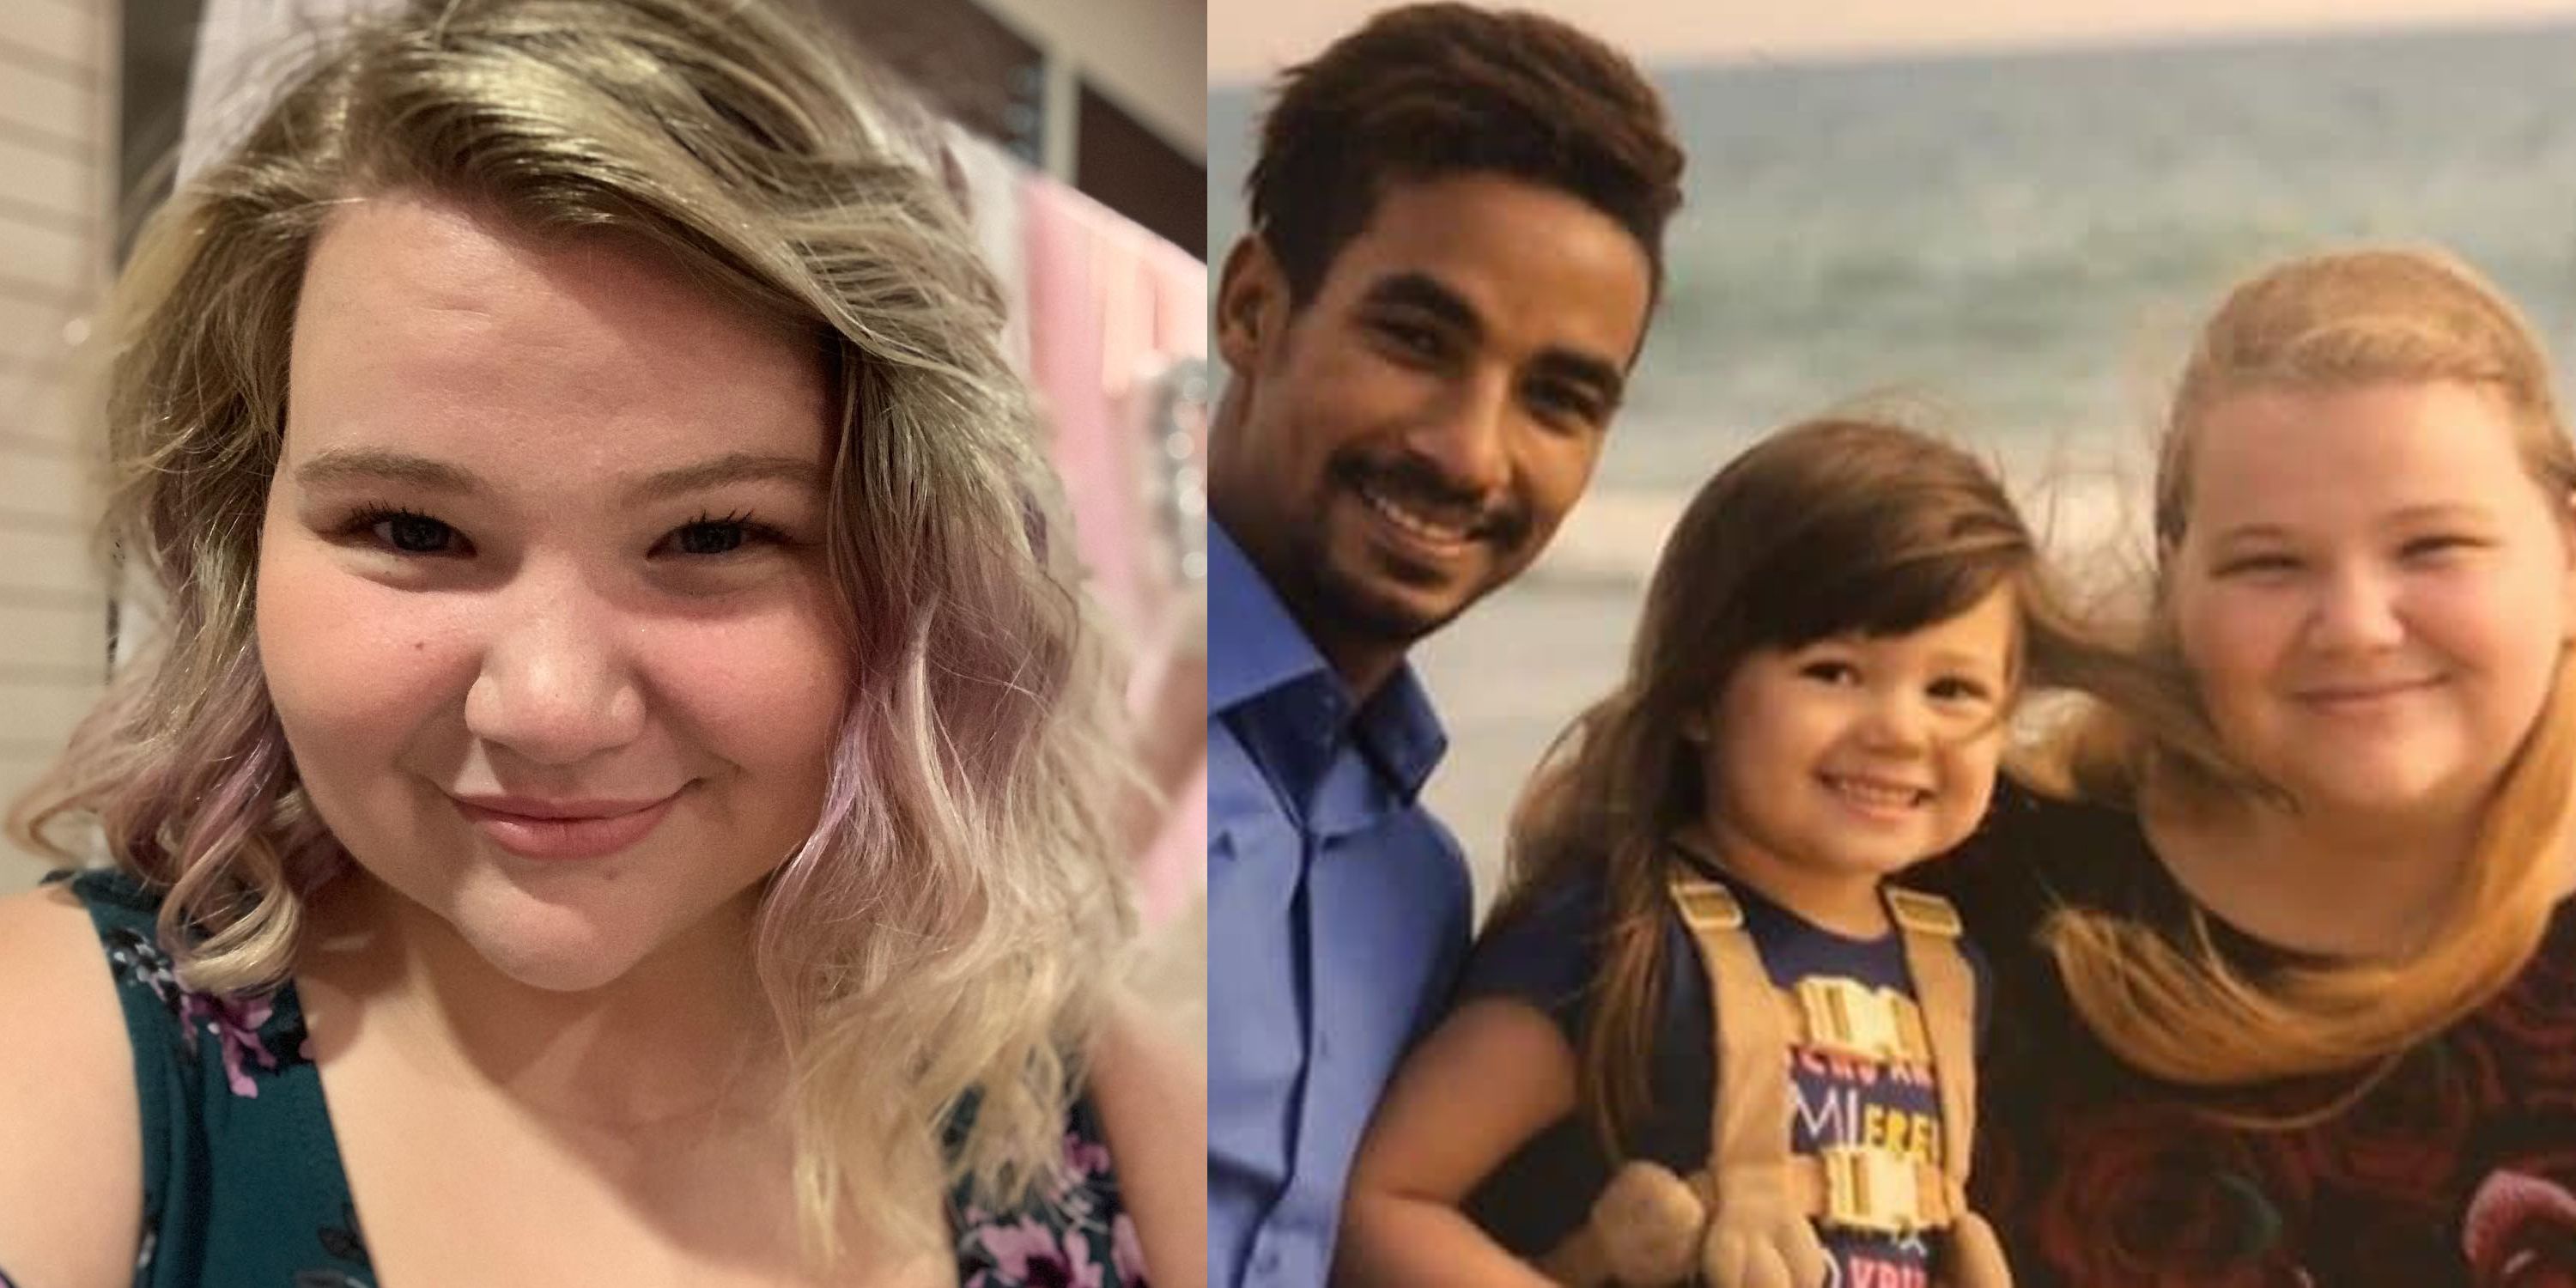 Nicole Nafziger with Azan Tefou and Daughter May of 90 Day Fiance